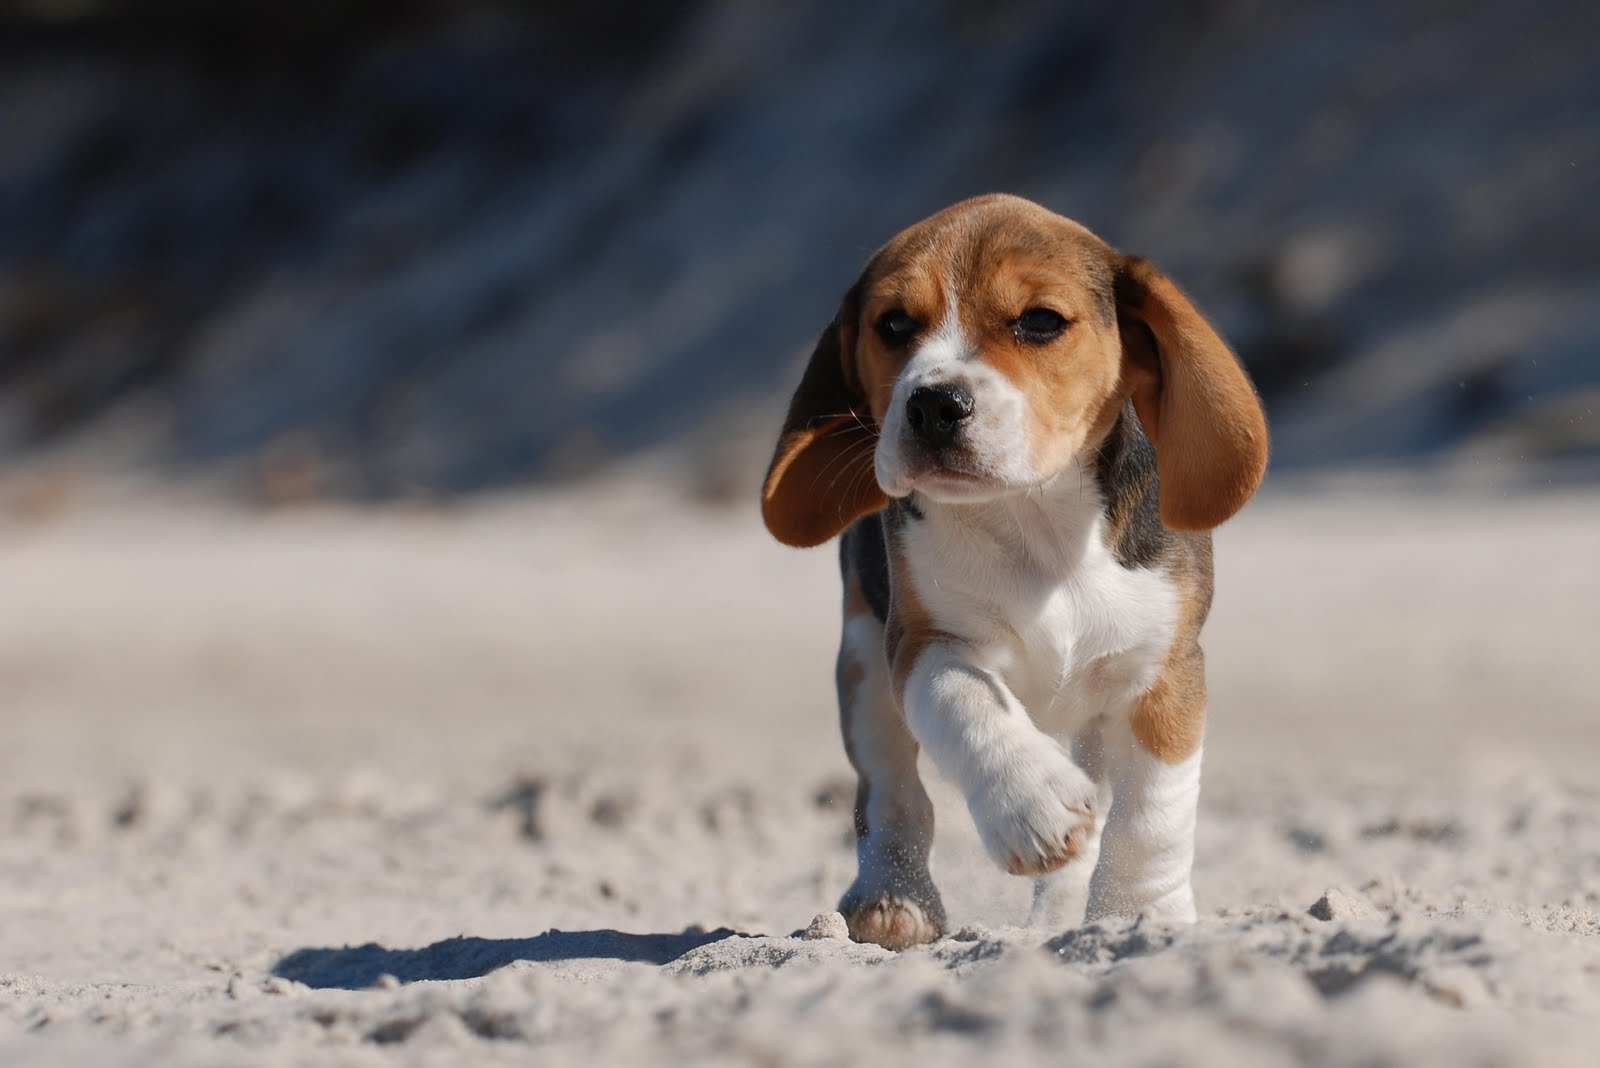 Puppy cute baby animal dog wallpaper free download photos for ...